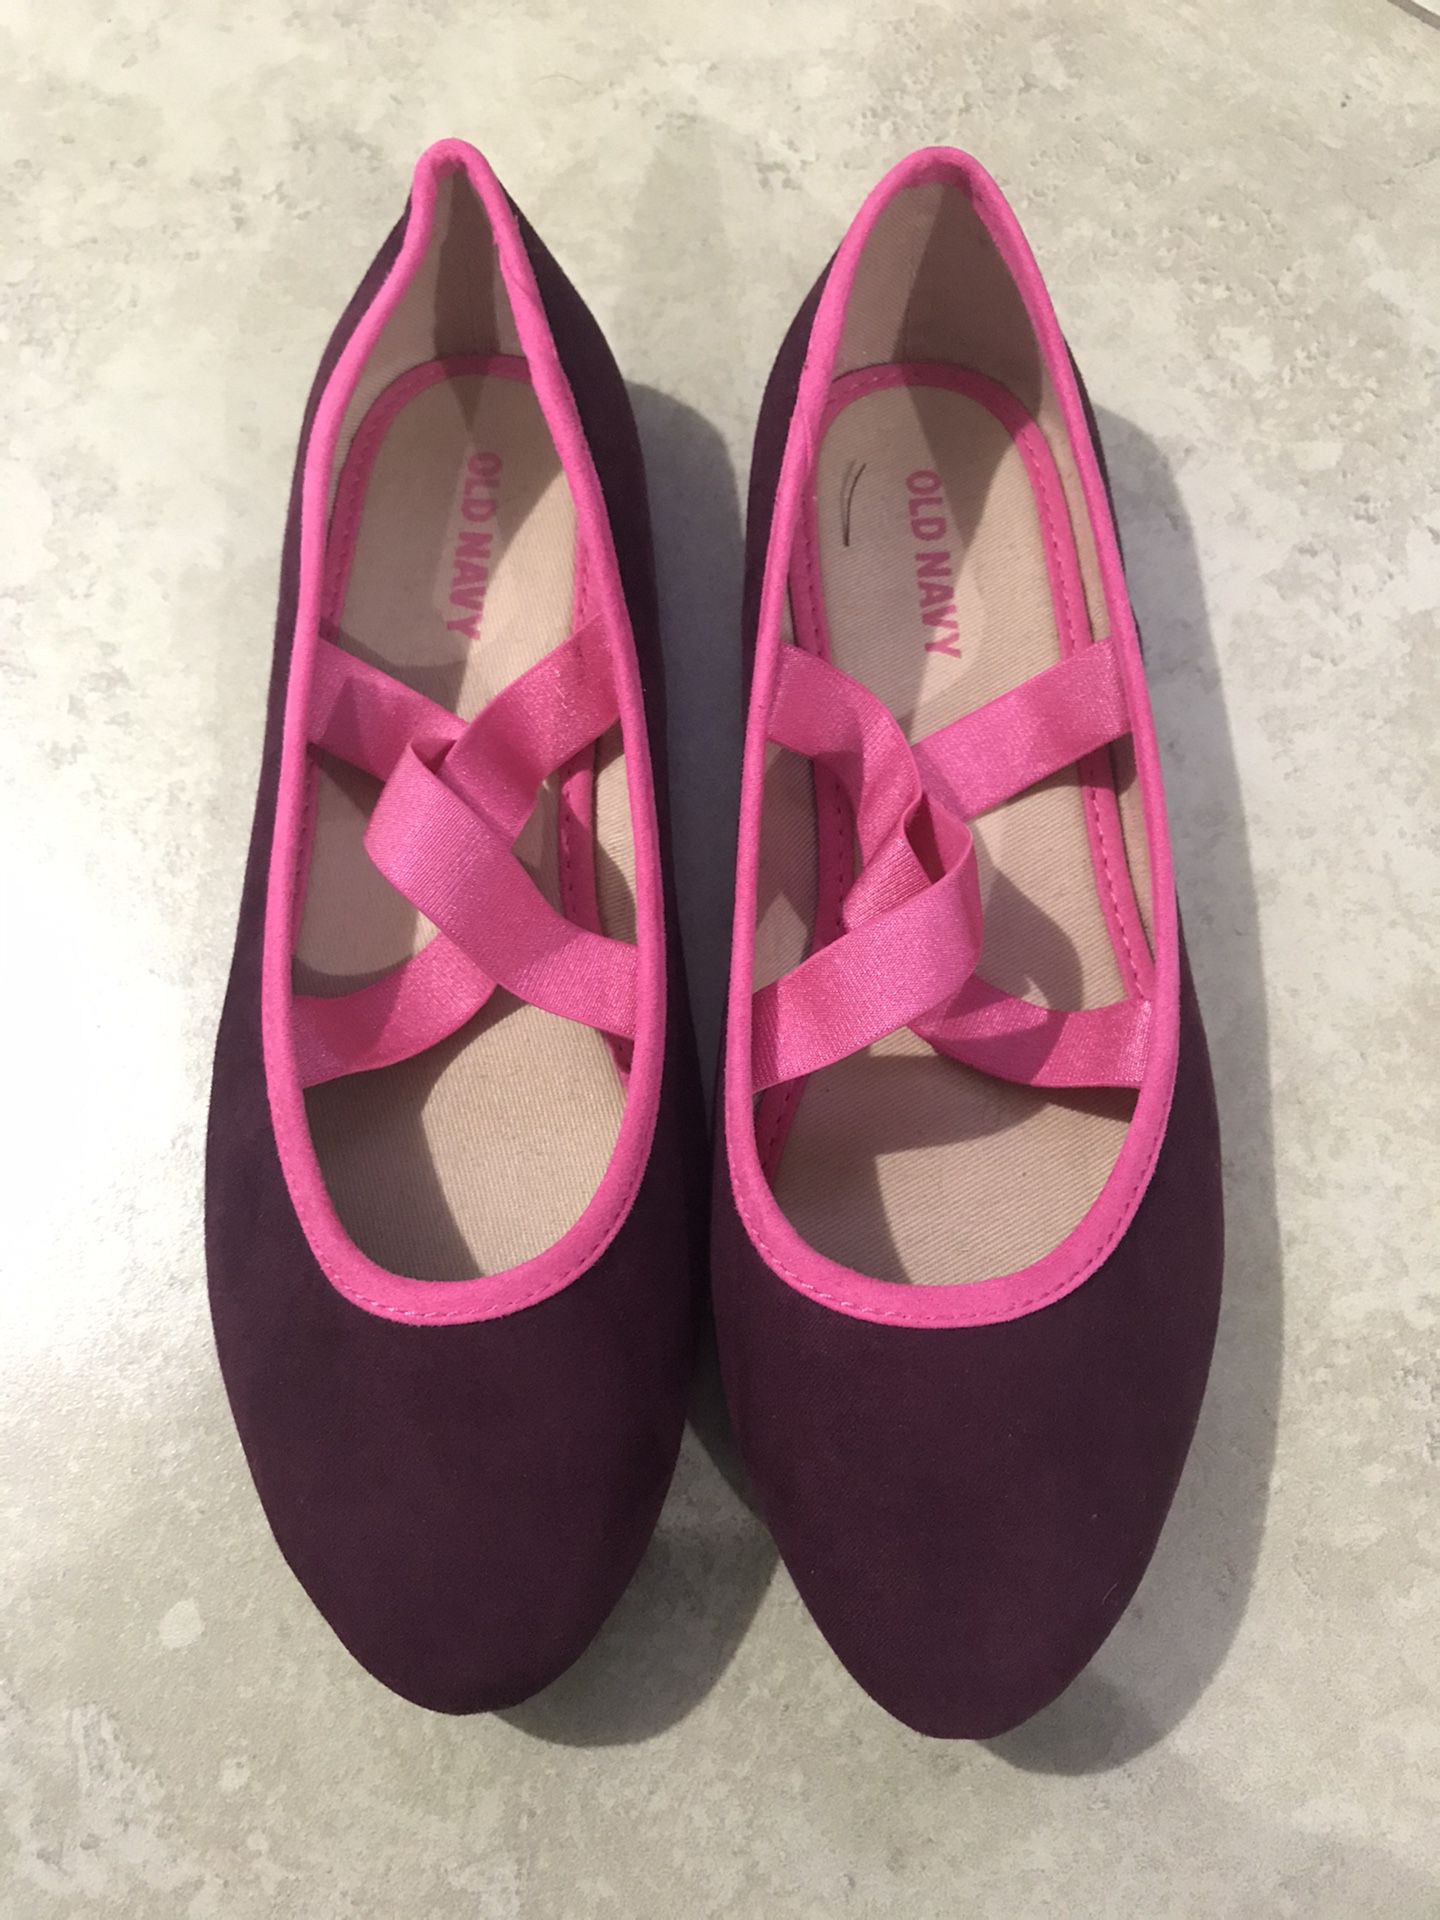 Old Navy Girl’s Elastic-Strap Ballet Flats / Shoes, Size 3